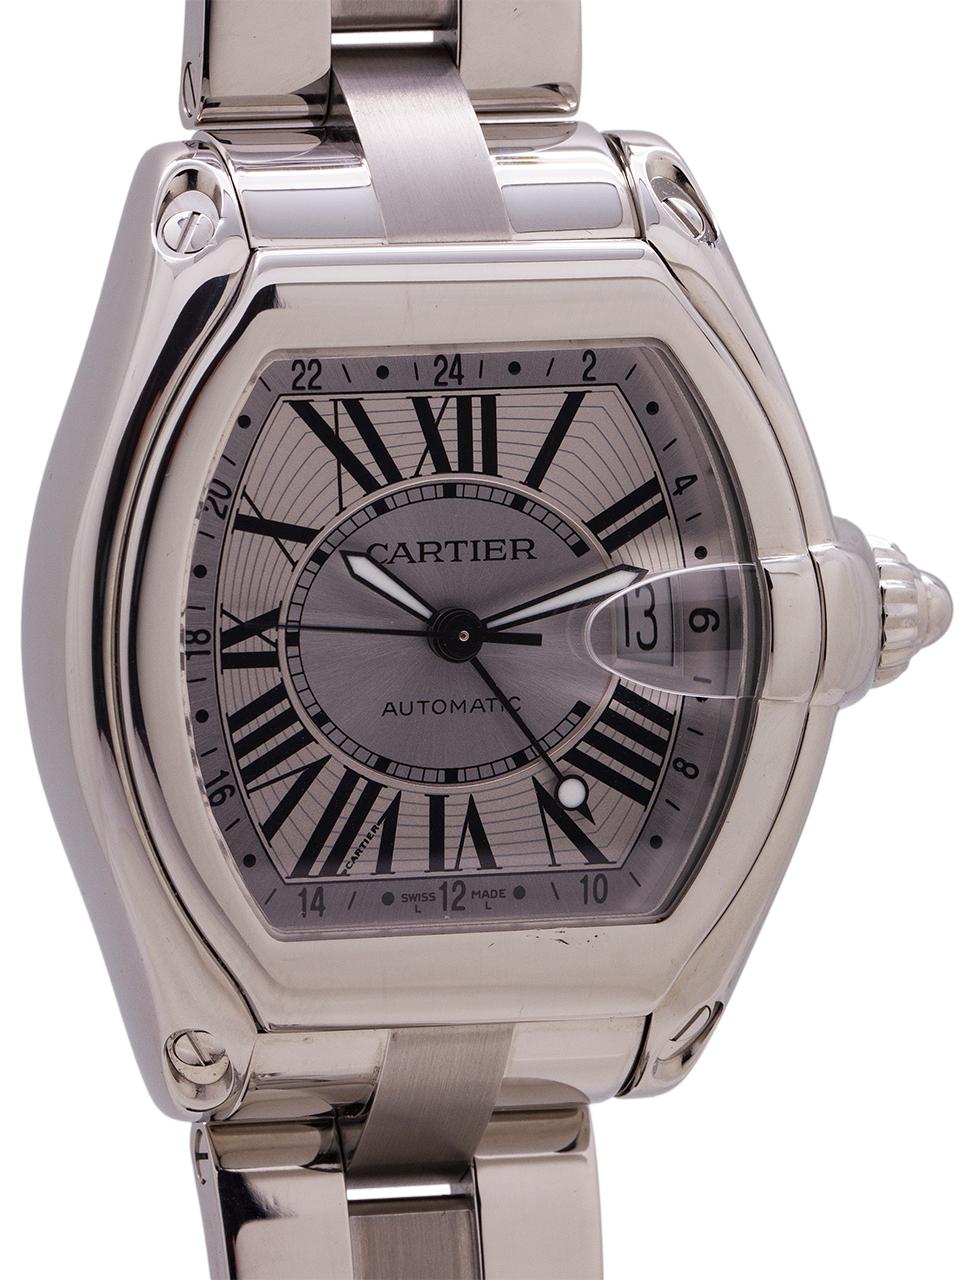 
Cartier Roadster Stainless Steel XL GMT model ref 2722 circa 2000s. Extra large size 41 x 48 mm tonneau shaped case with steel cabochon crown and sapphire crystal. Silver dial with black Roman numerals with luminous hands. Powered by self winding